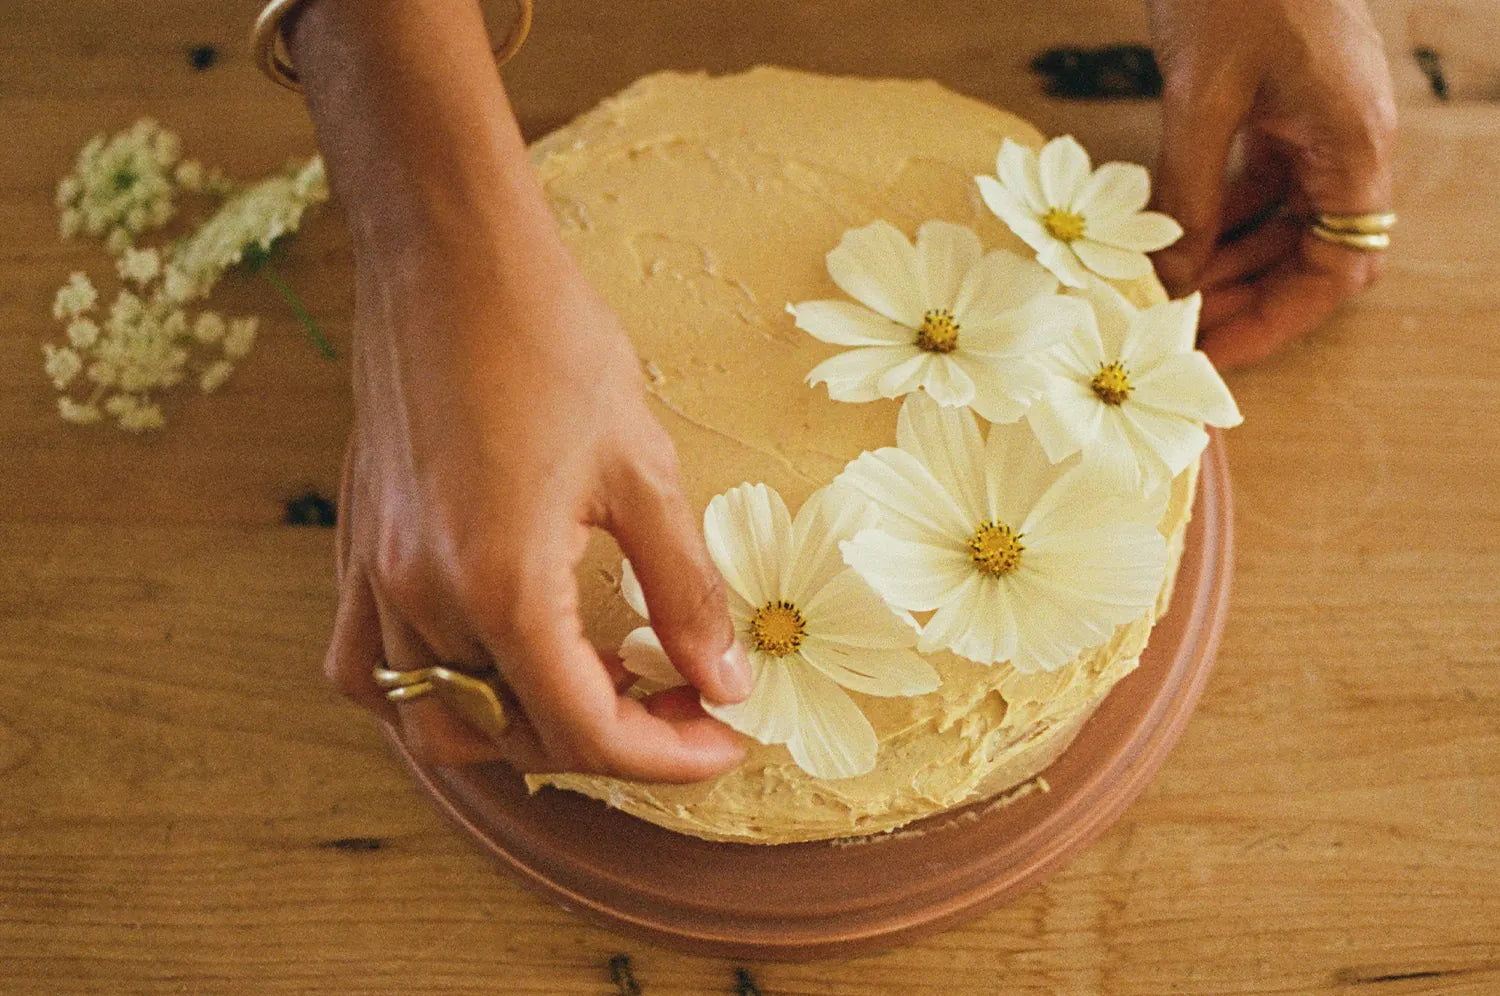 A woman placing flowers on top of an olive oil cake adorned with mood-boosting saffron buttercream frosting from The Fullest.